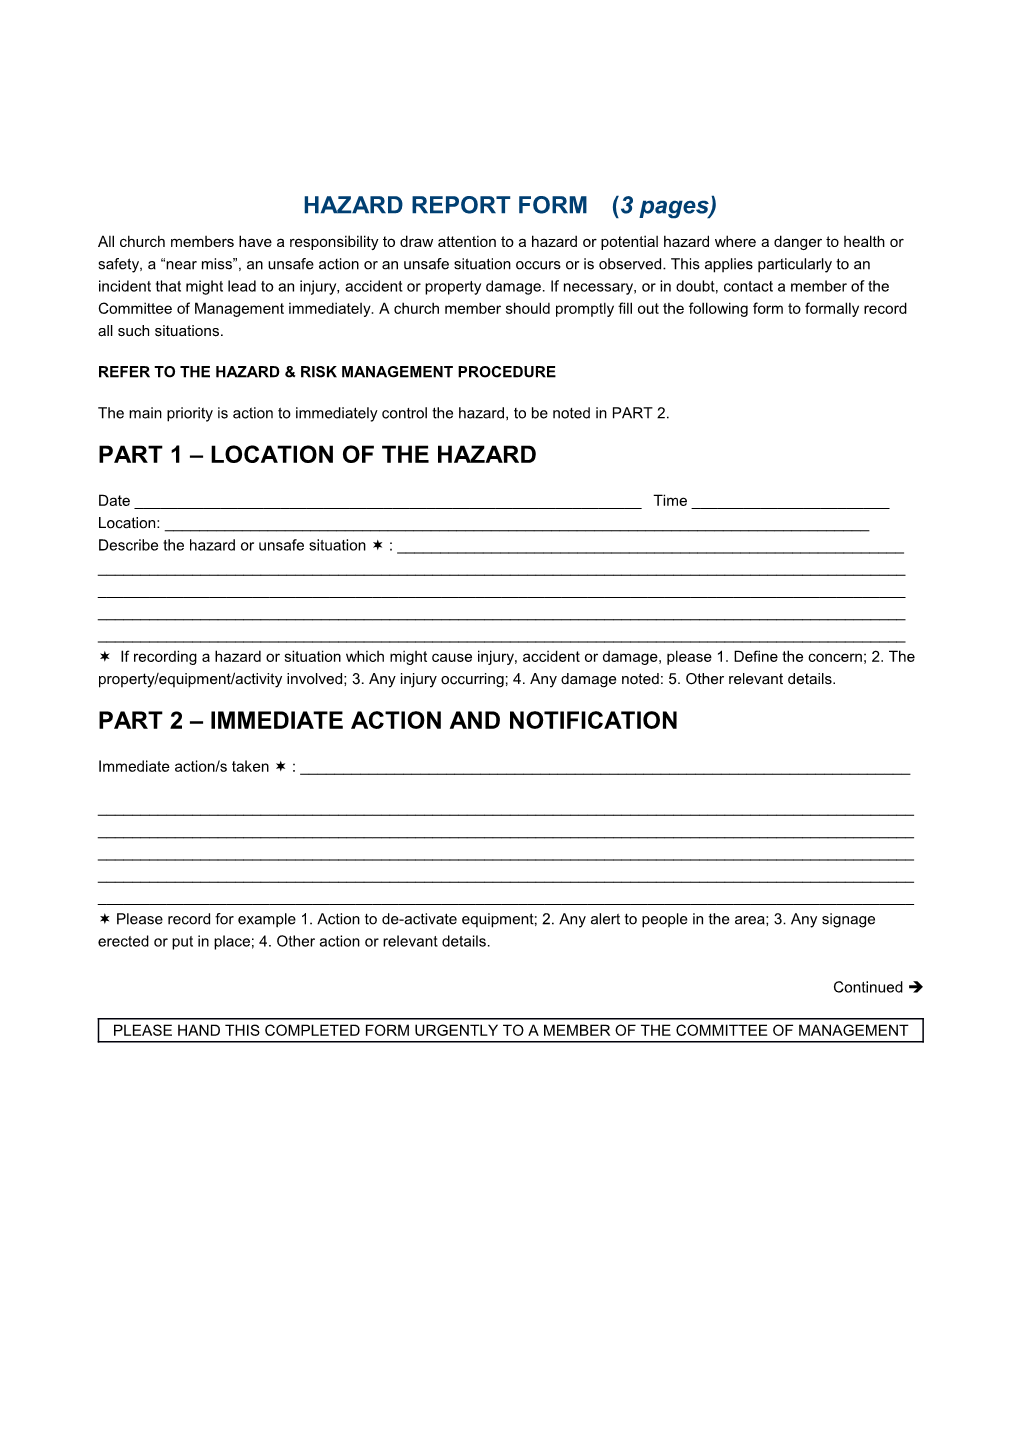 HAZARD REPORT FORM(3 Pages)